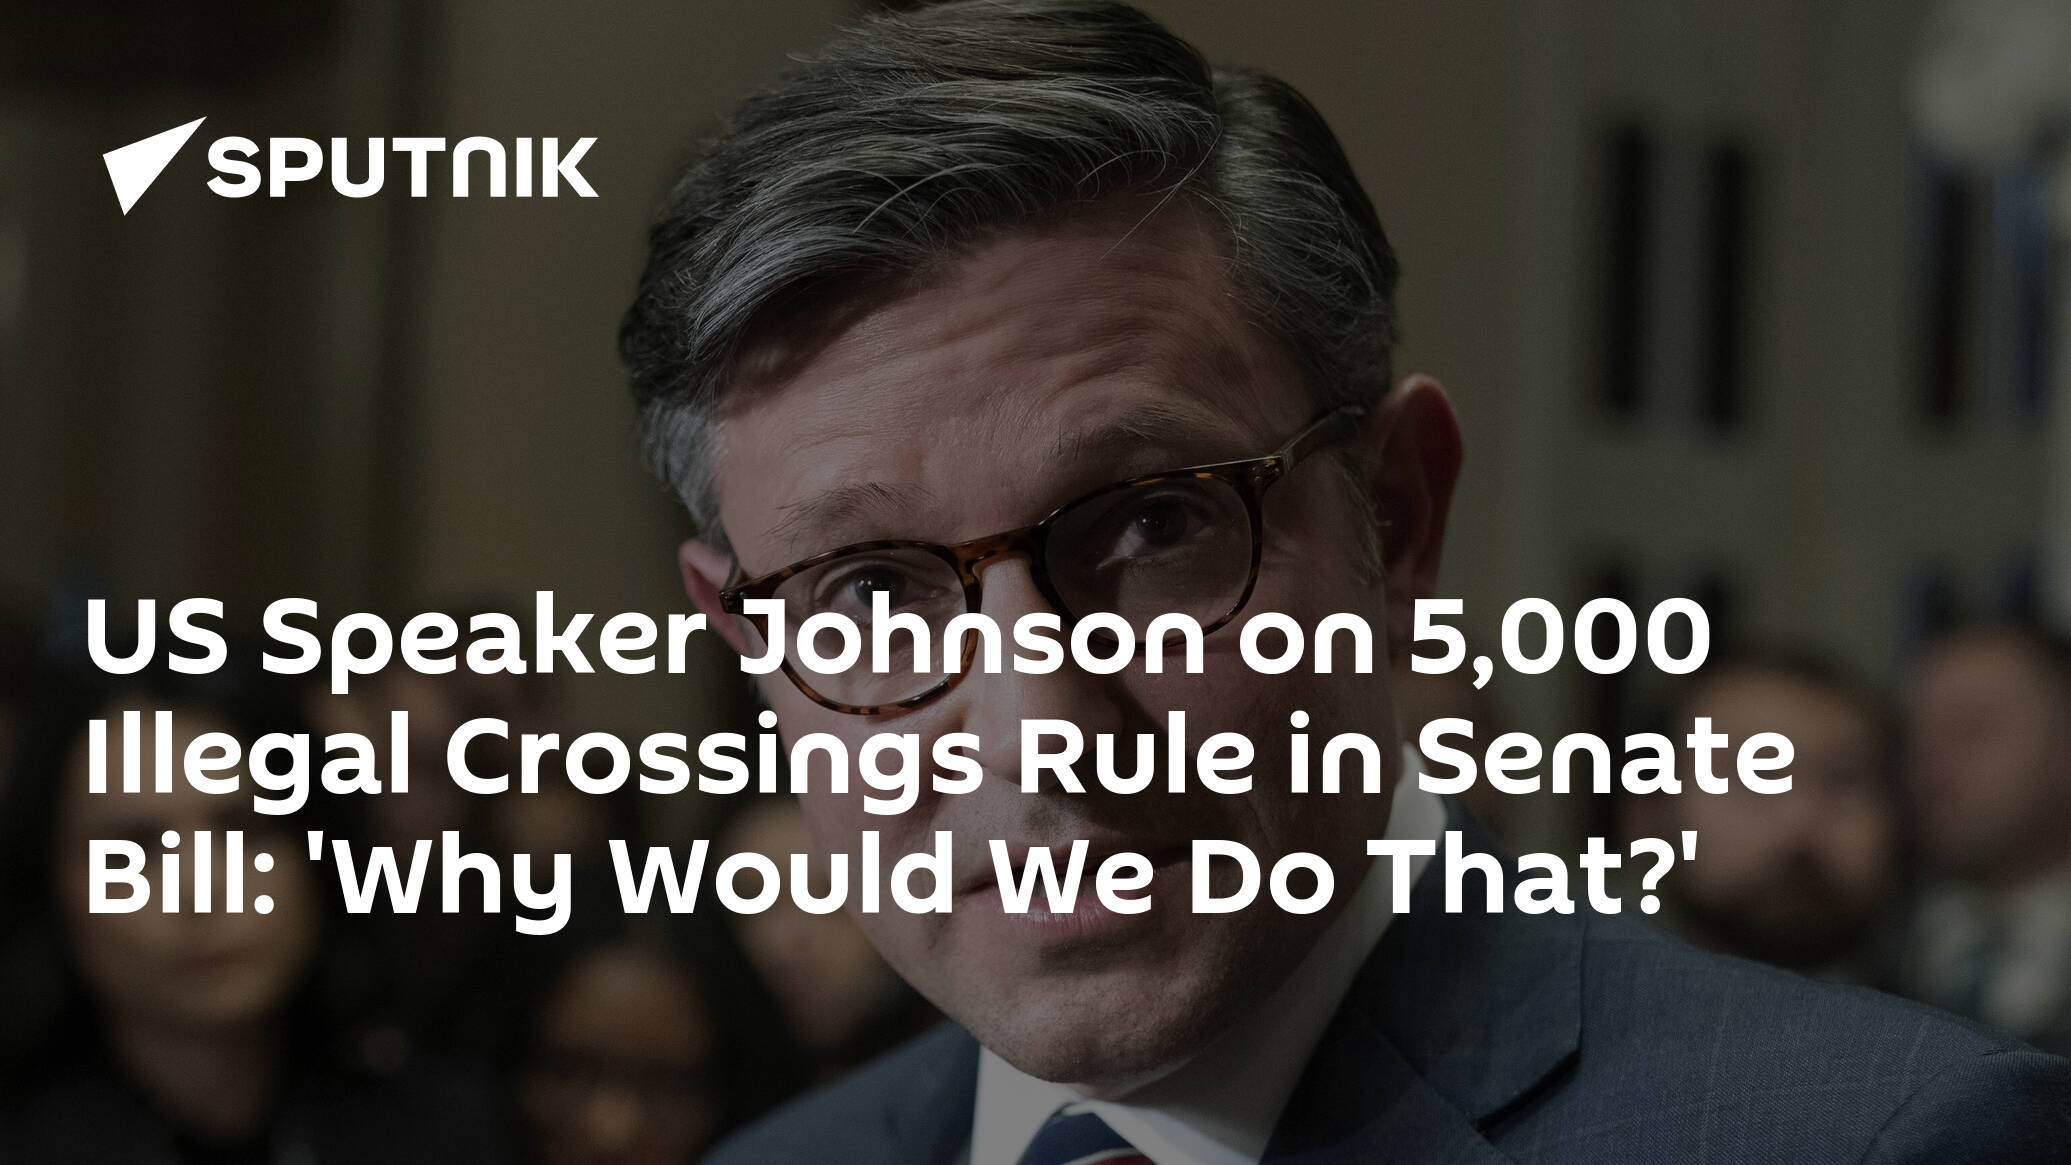 US Speaker Johnson on 5,000 Illegal Crossings Rule in Senate Bill: 'Why Would We Do That?'